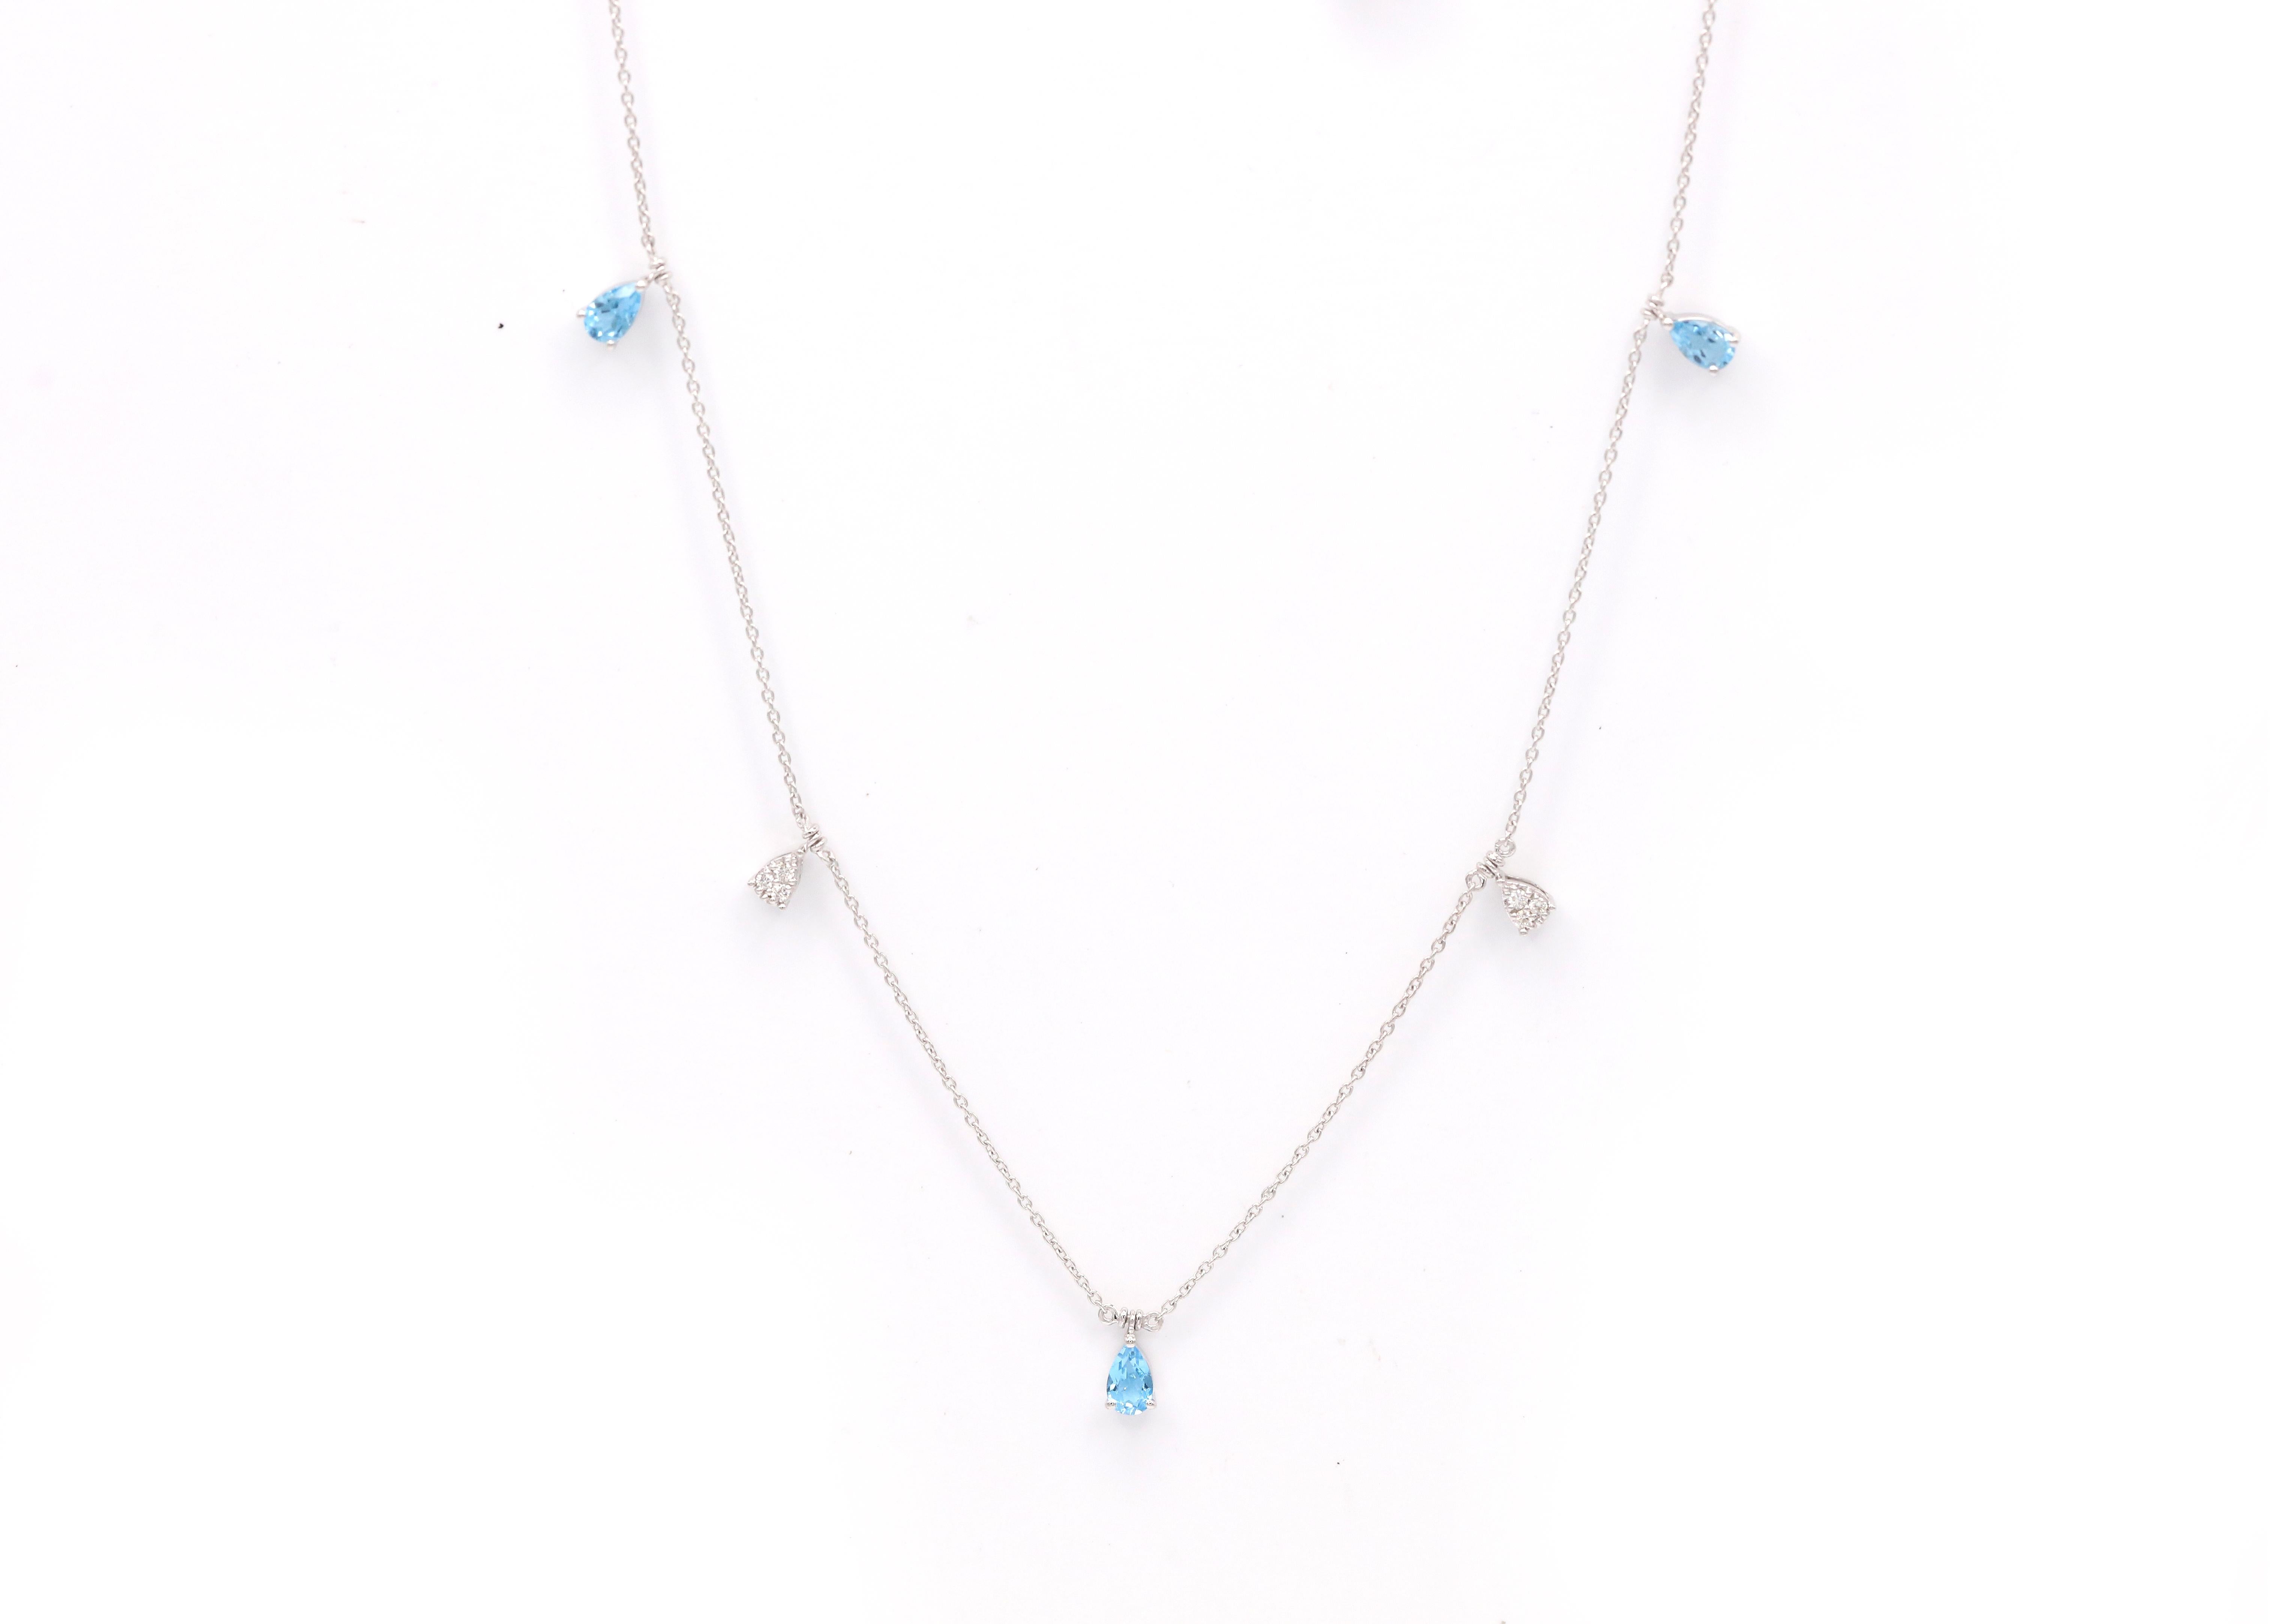 0.85 Carat Blue Topaz 0.05 Carat Diamonds White Gold Necklace In New Condition For Sale In Montreux, VD